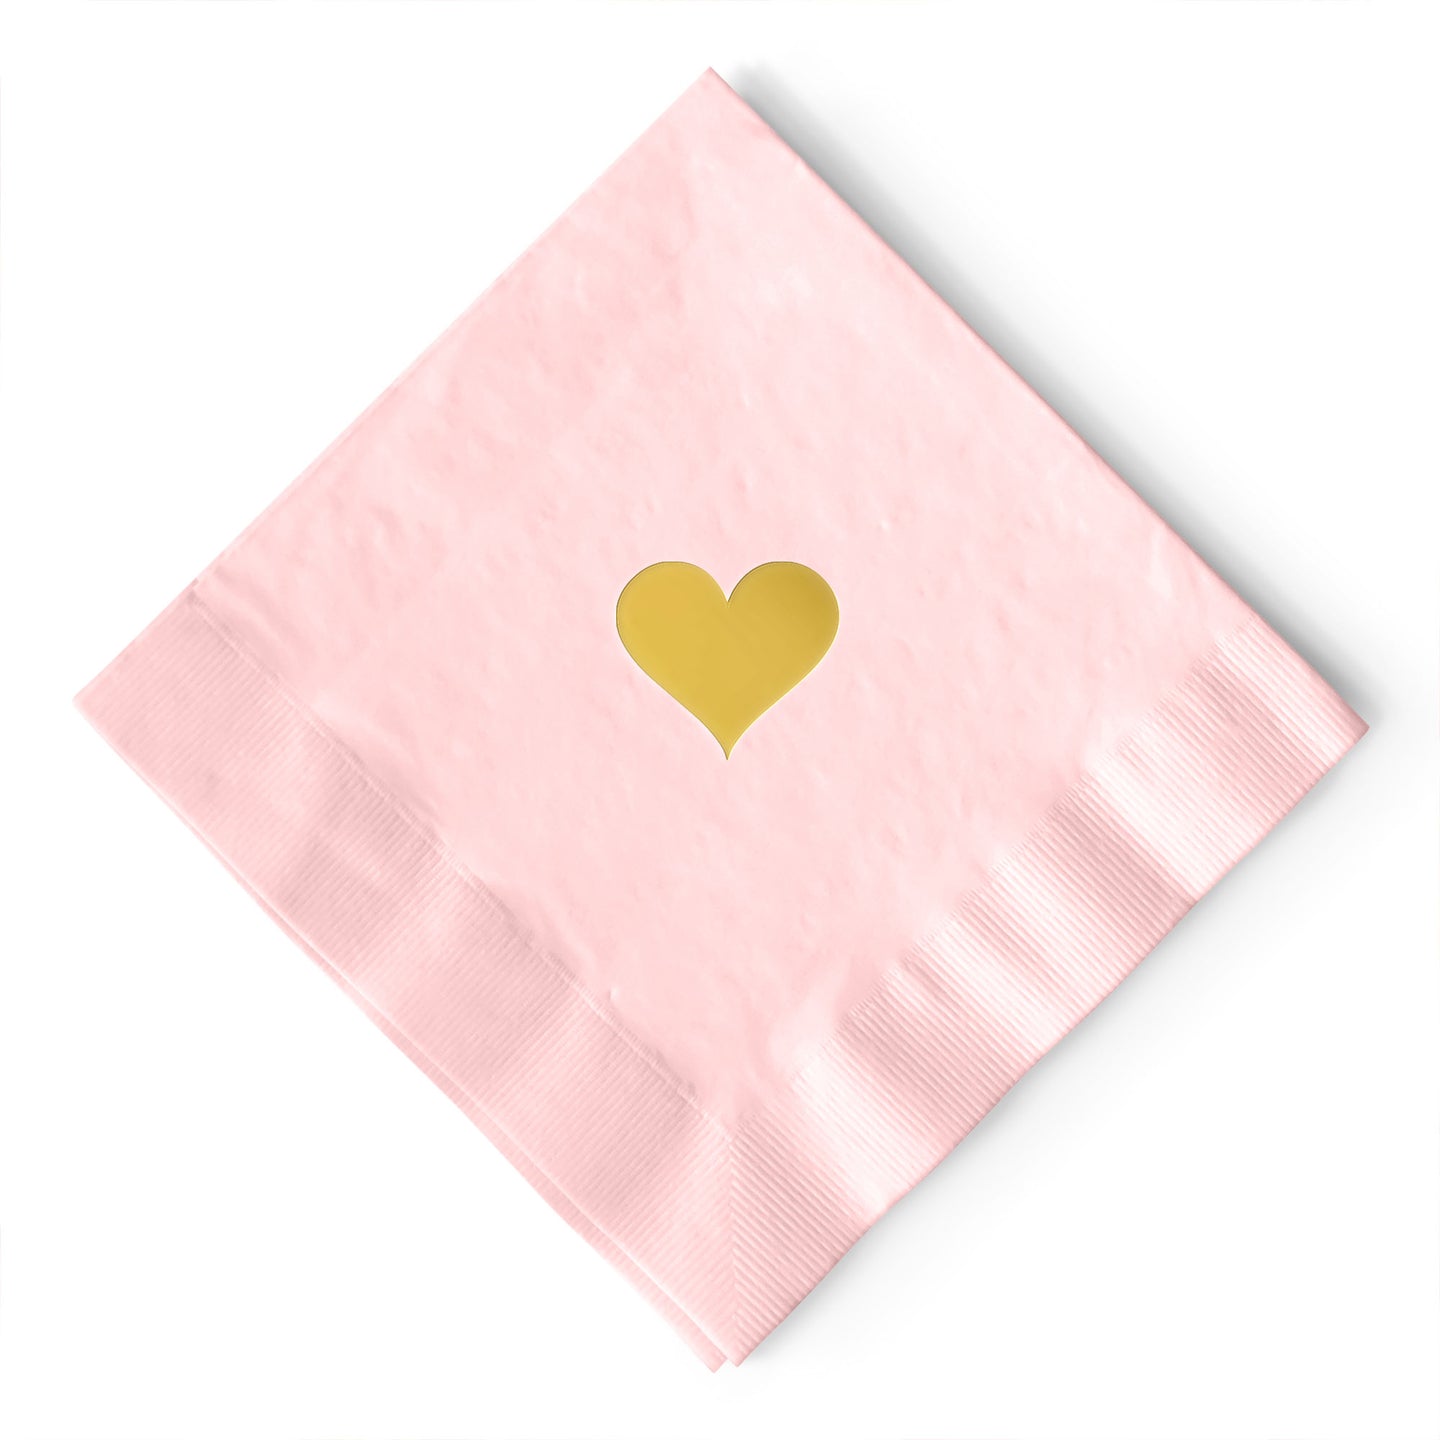 Heart Napkins for Valentine's Day Pink and Gold - Set of 20